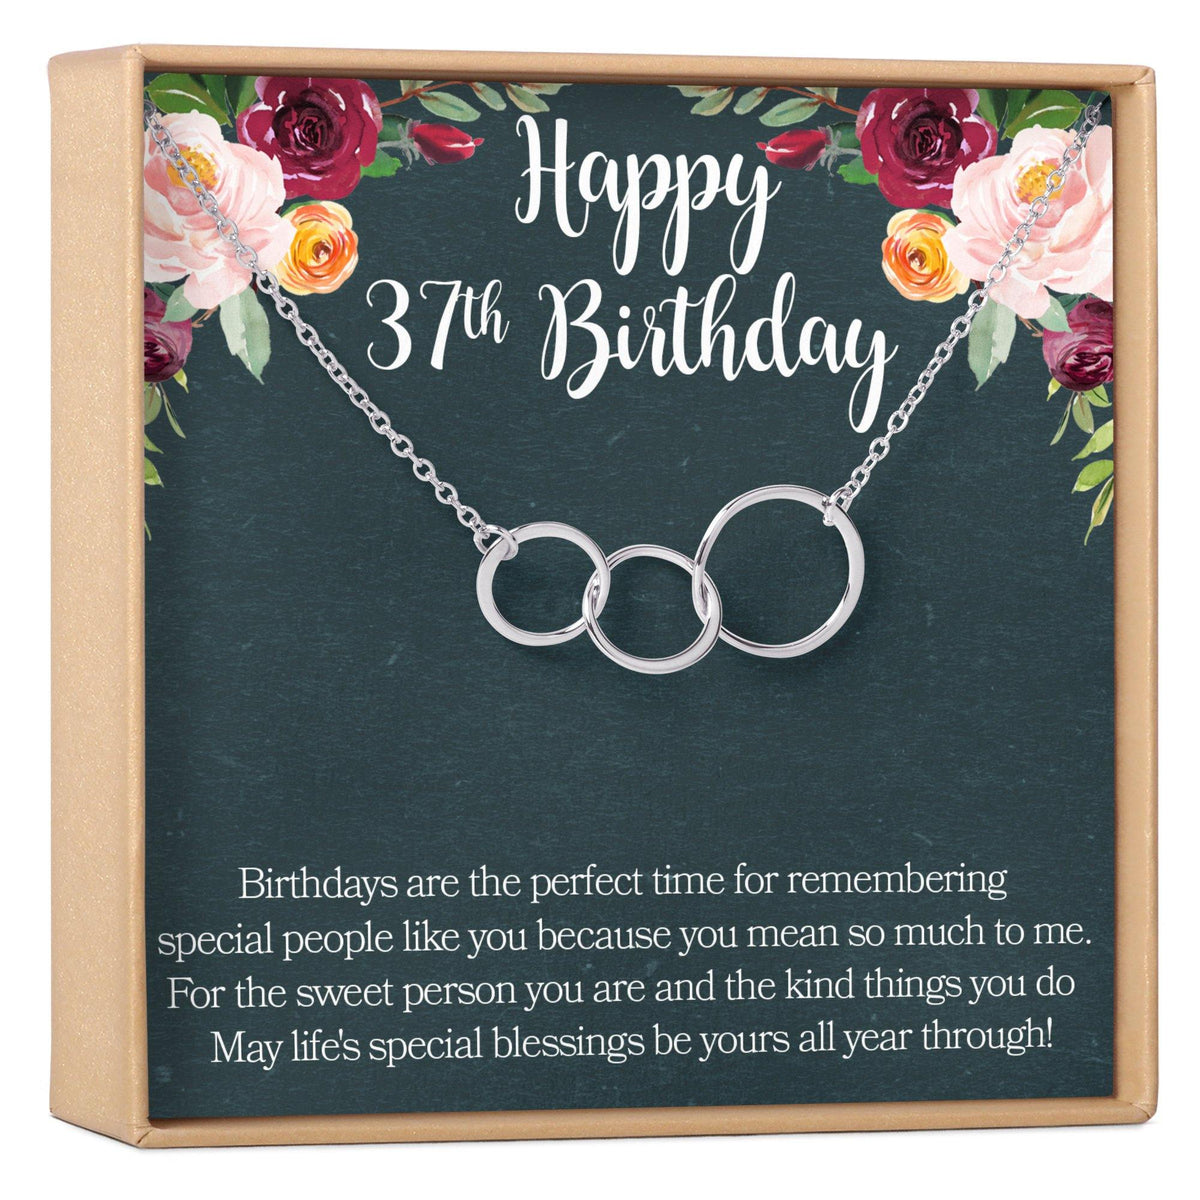 37th Birthday Necklace - Dear Ava, Jewelry / Necklaces / Pendants